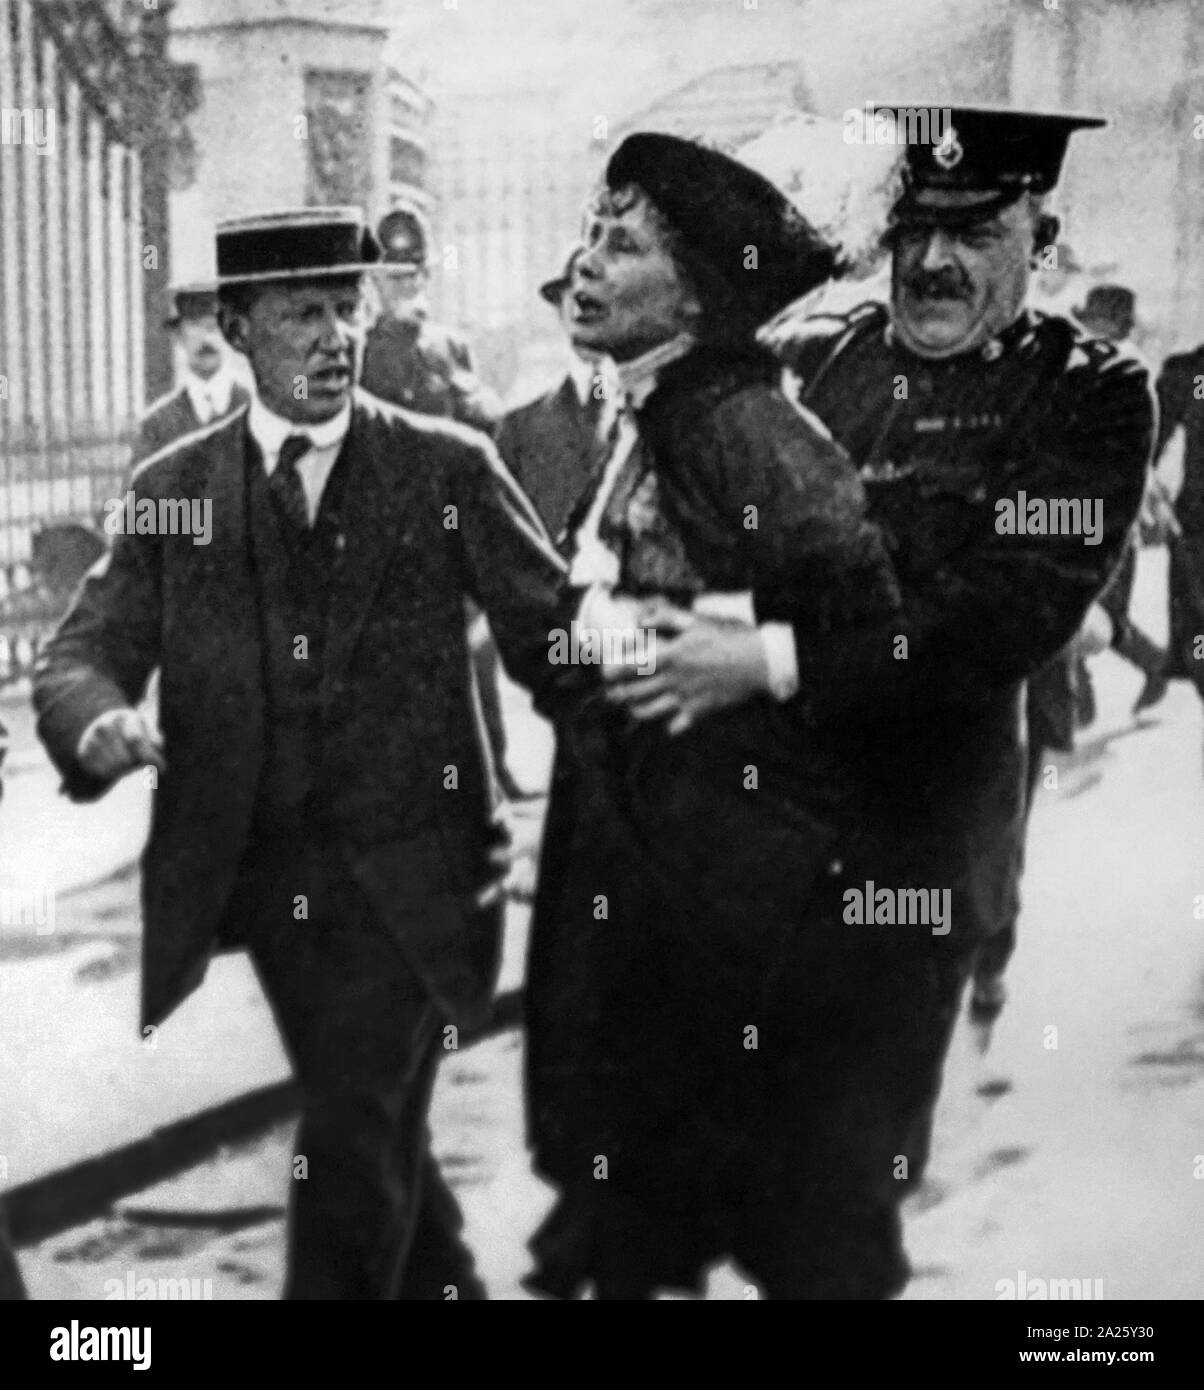 Photograph of Emmeline Pankhurst being arrested in Britain. Emmeline Pankhurst (1858-1928) a British political activist and helper of the British suffragette movement who helped women win the right to vote. Stock Photo